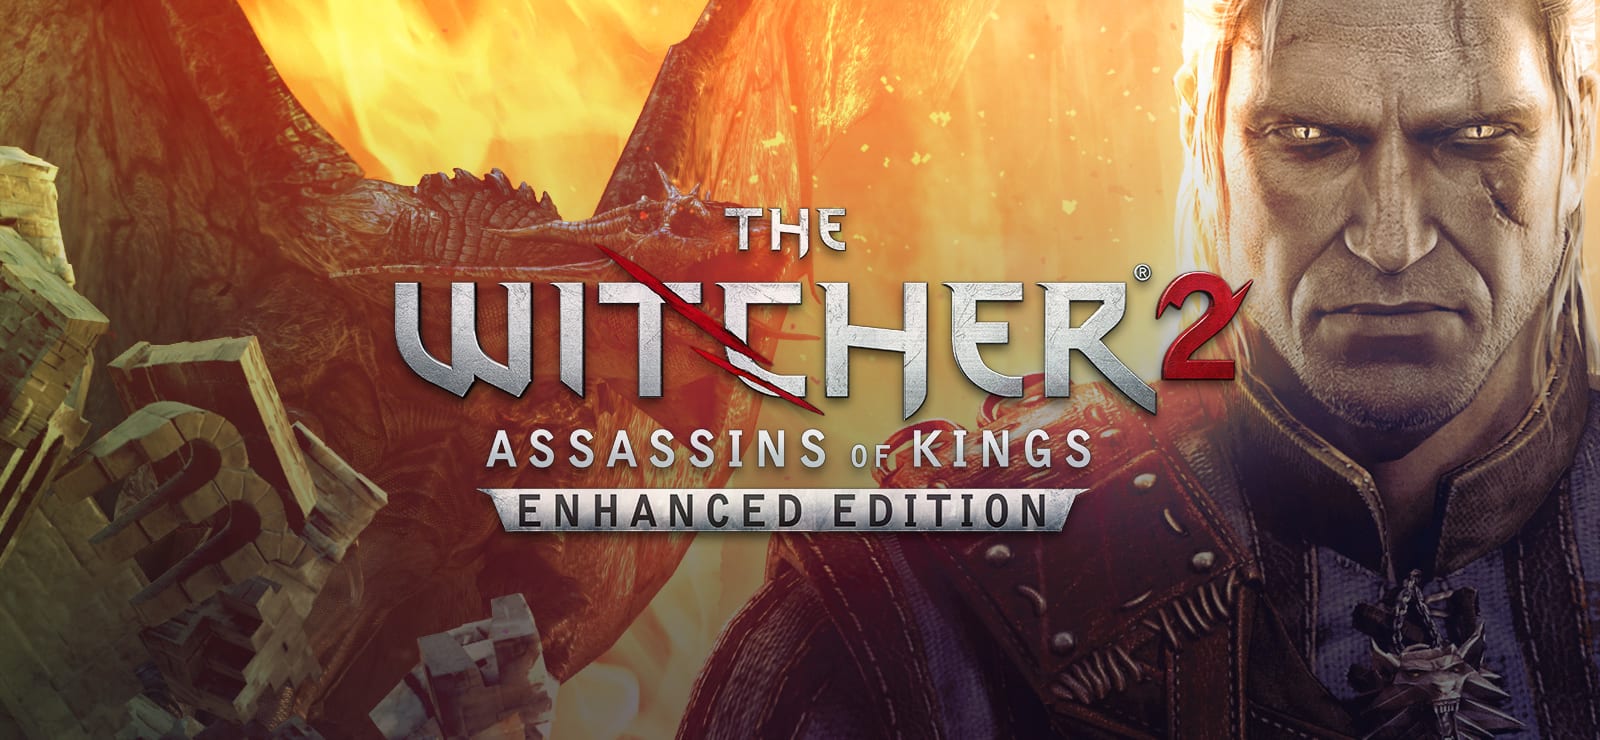 The witcher enhanced edition torrent mac free version